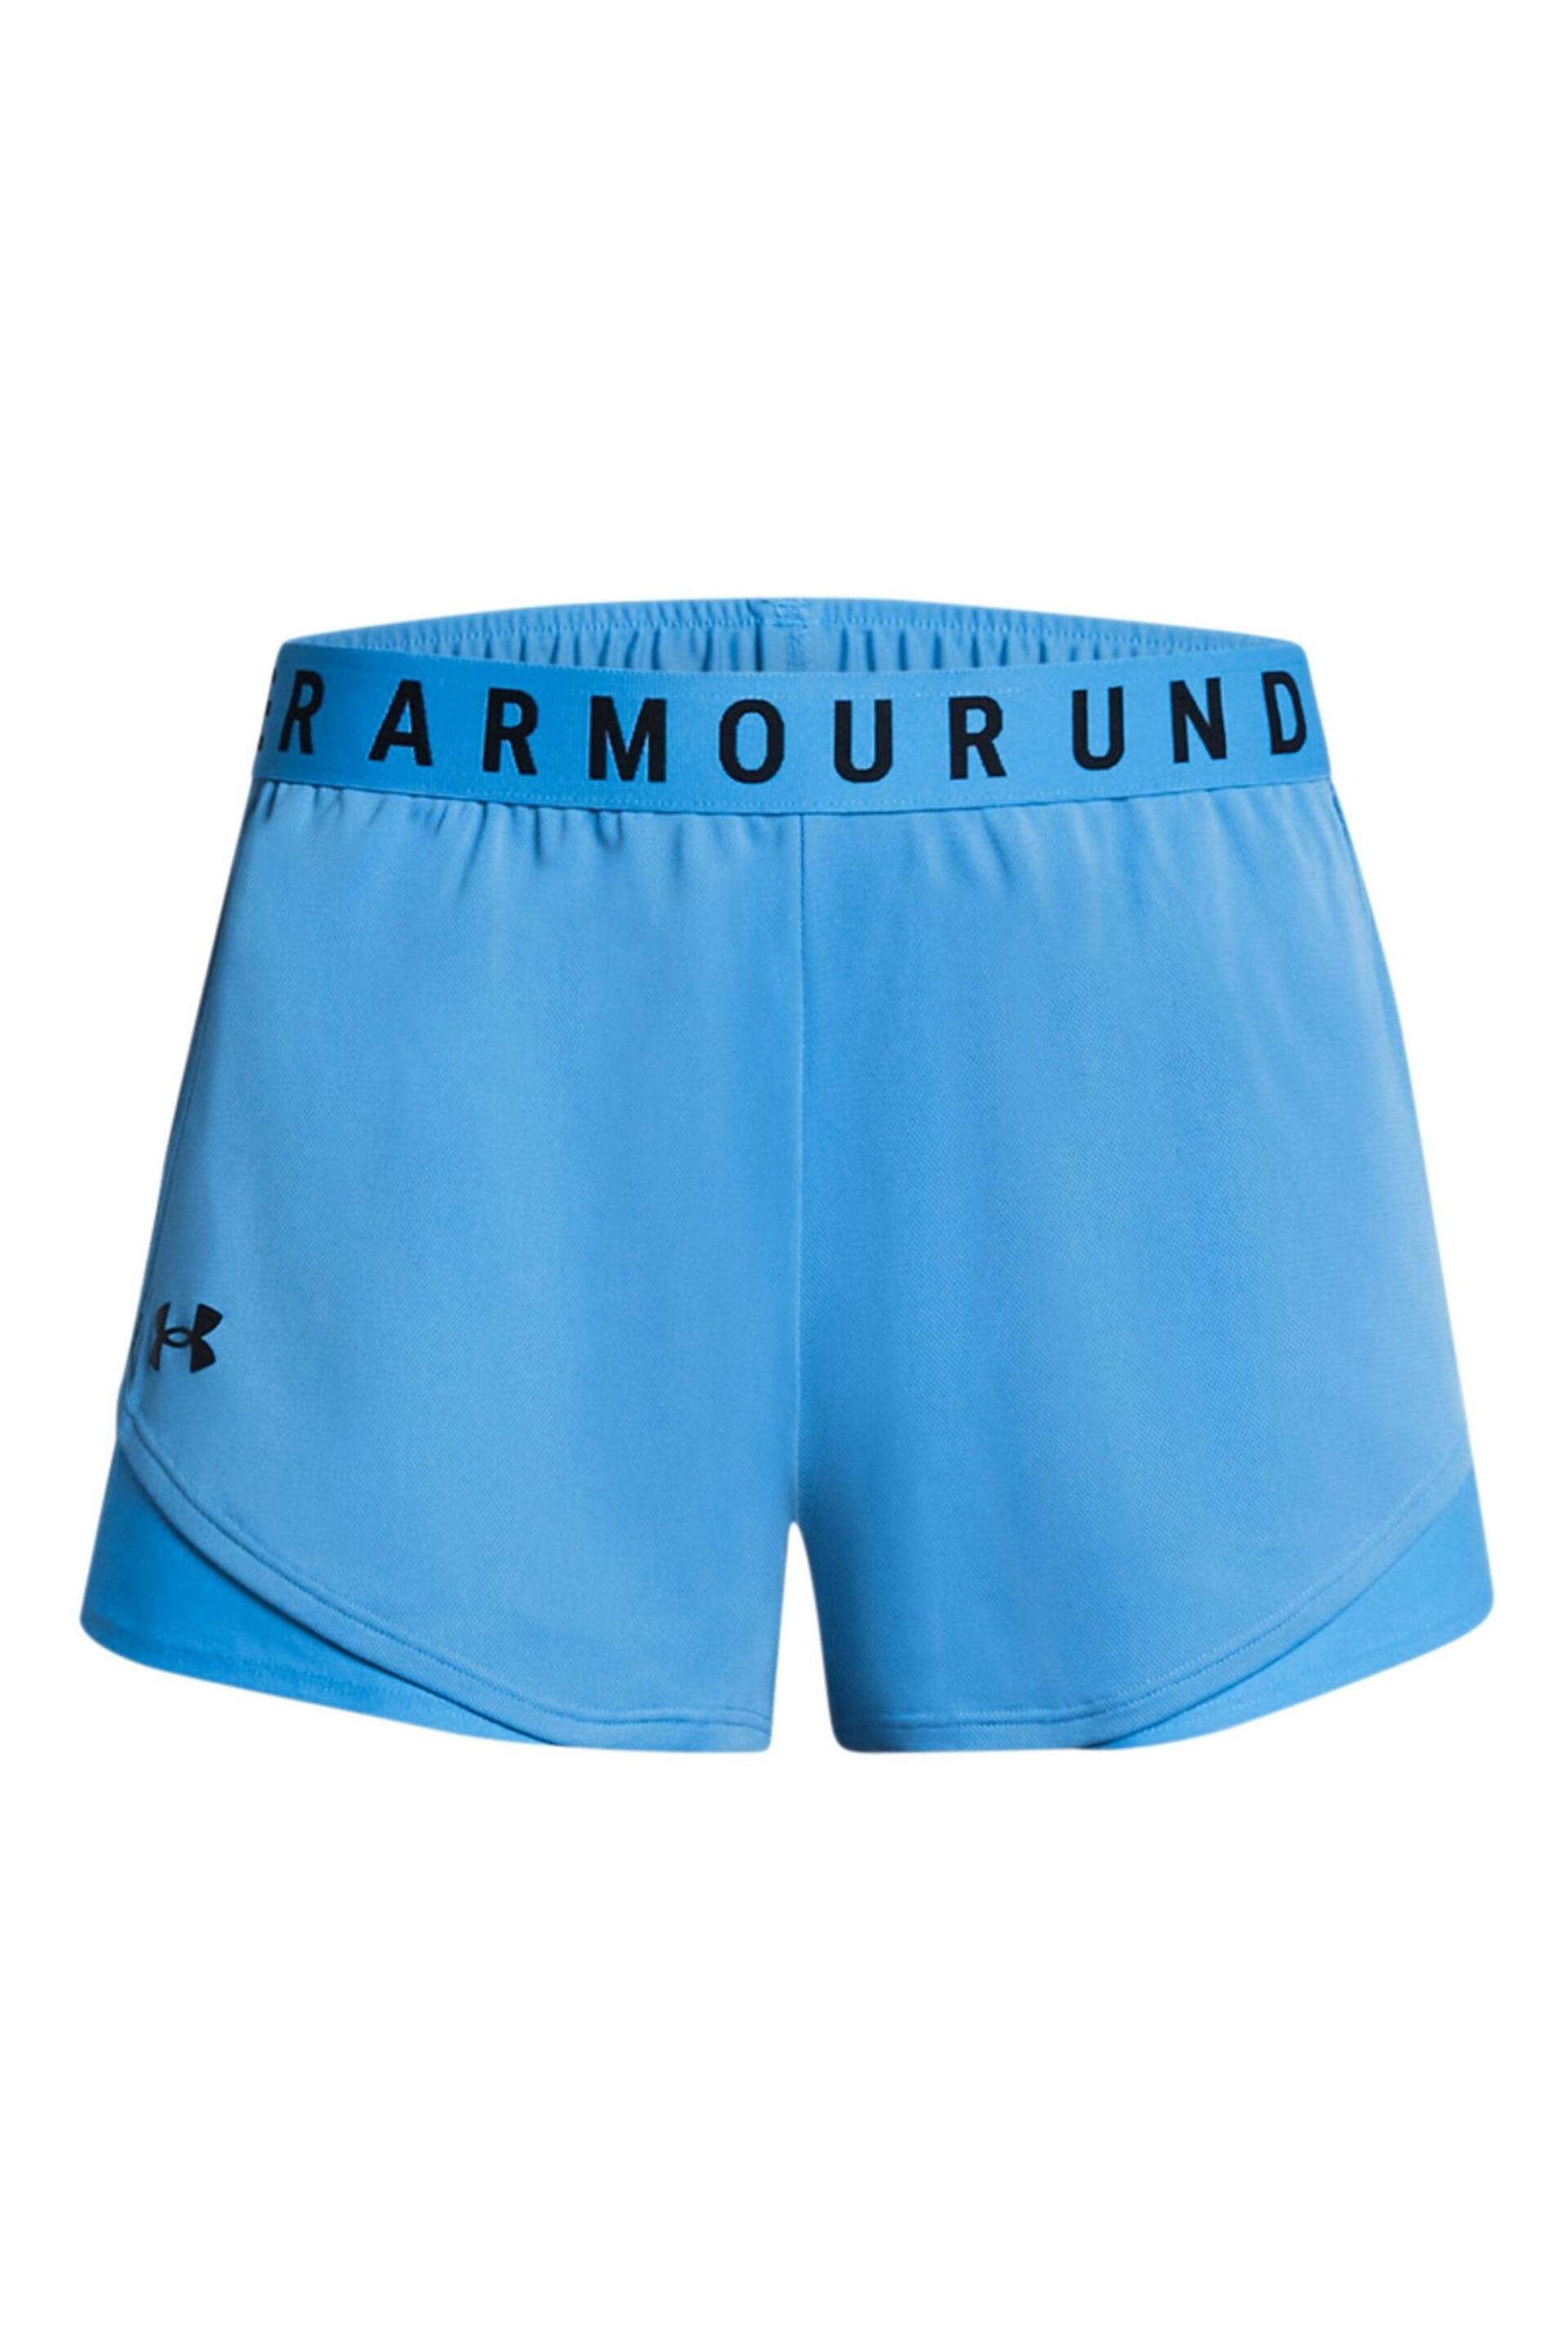 Under Armour Blue Play Up Shorts - Image 5 of 6